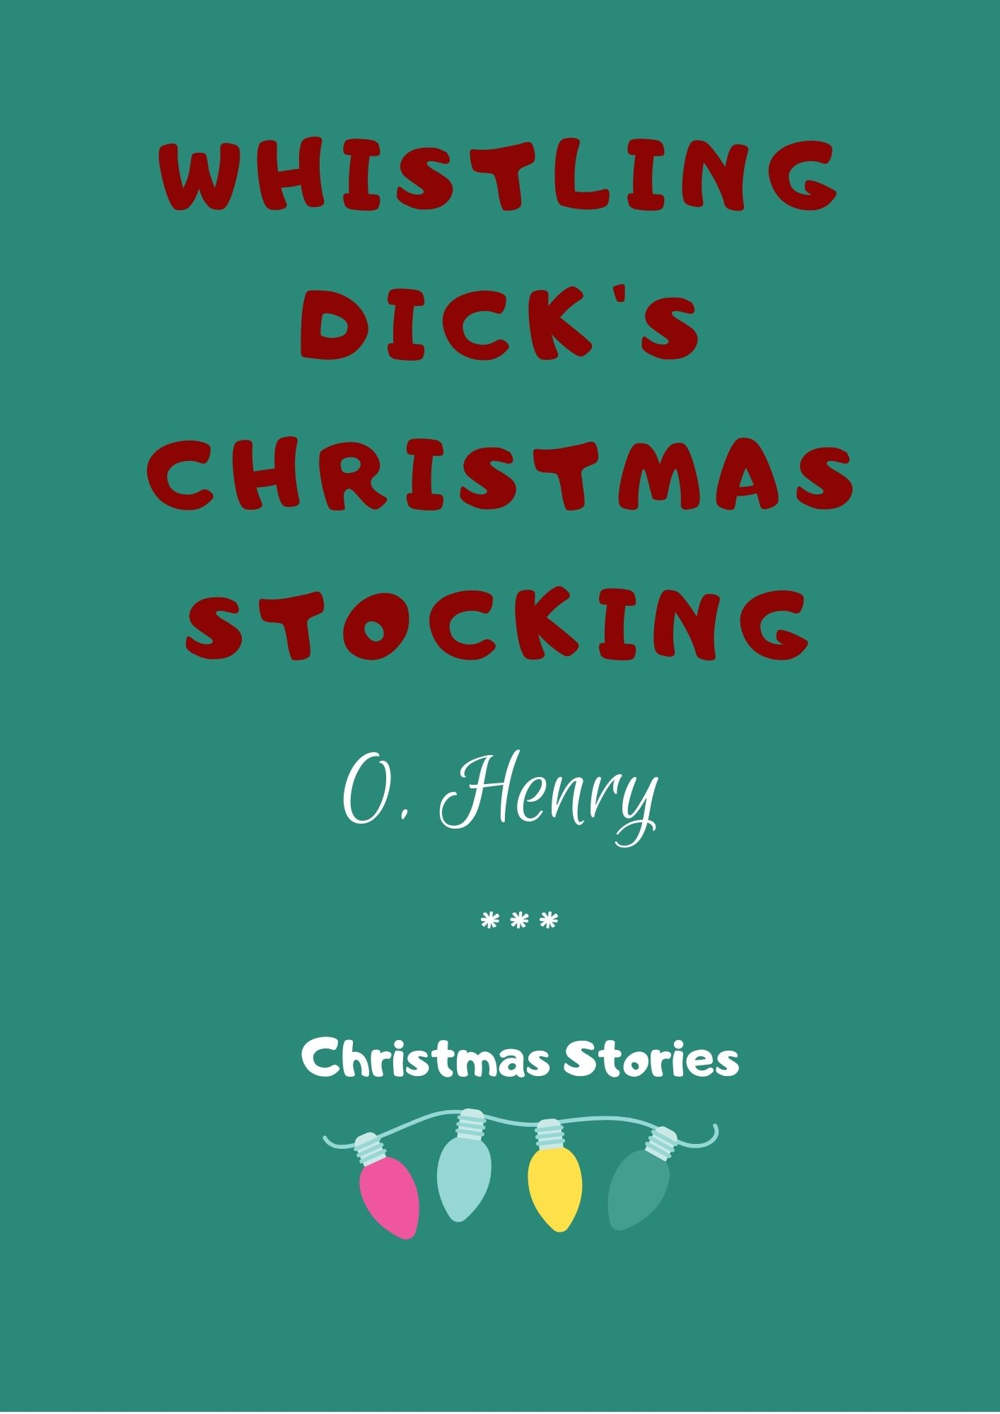 Whistling Dick's Christmas Stocking by O. Henry